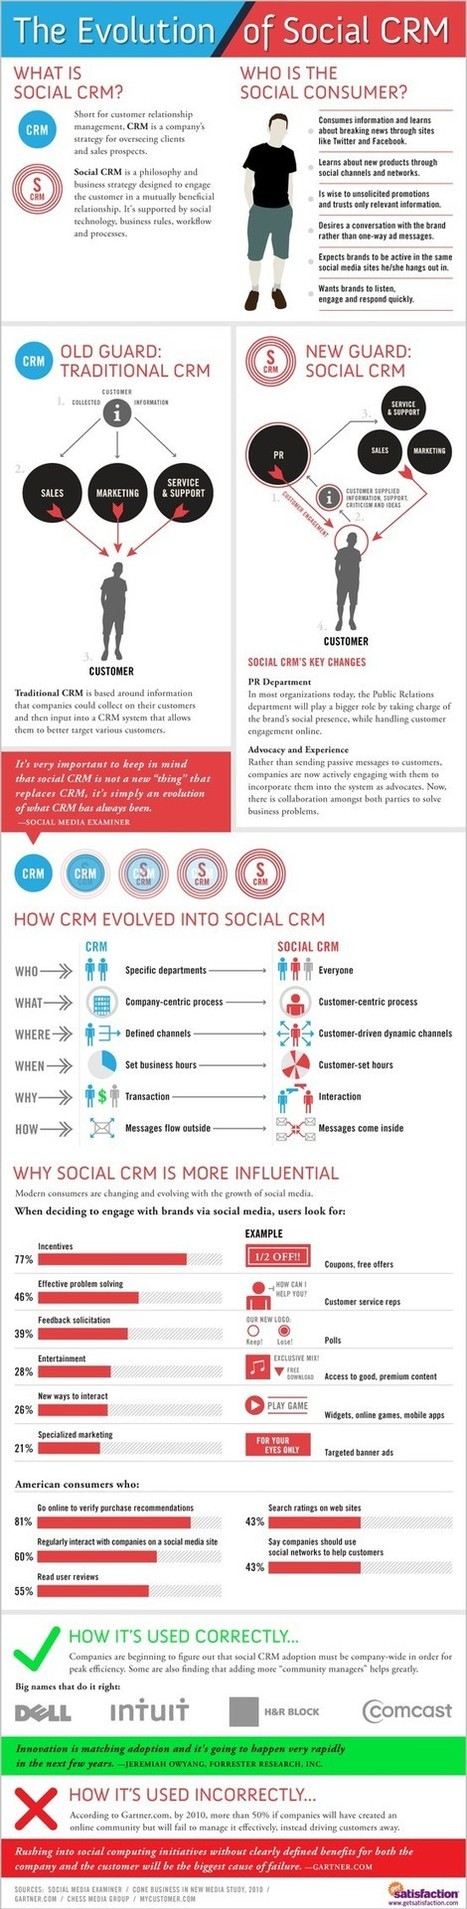 The evolution of Social CRM [infographic] | Must Market | Scoop.it